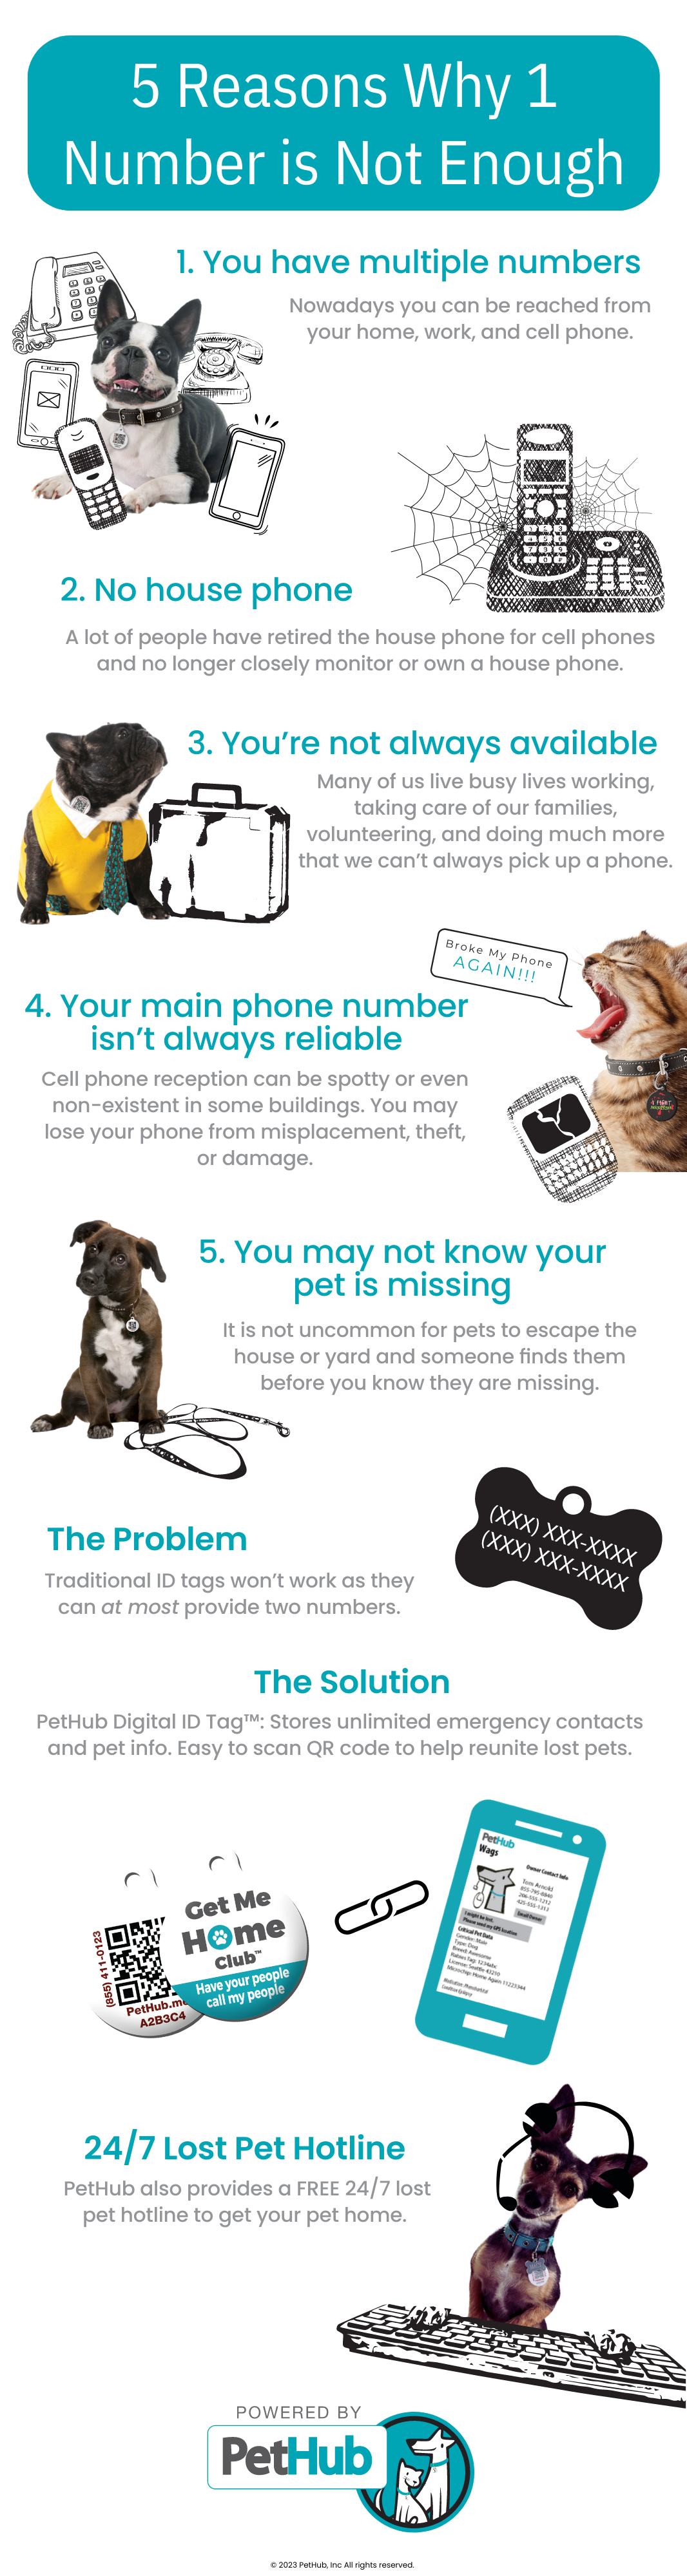 An infographic showing 5 reasons an ID tag with one phone isn't enough and the needs for digital ID tags.